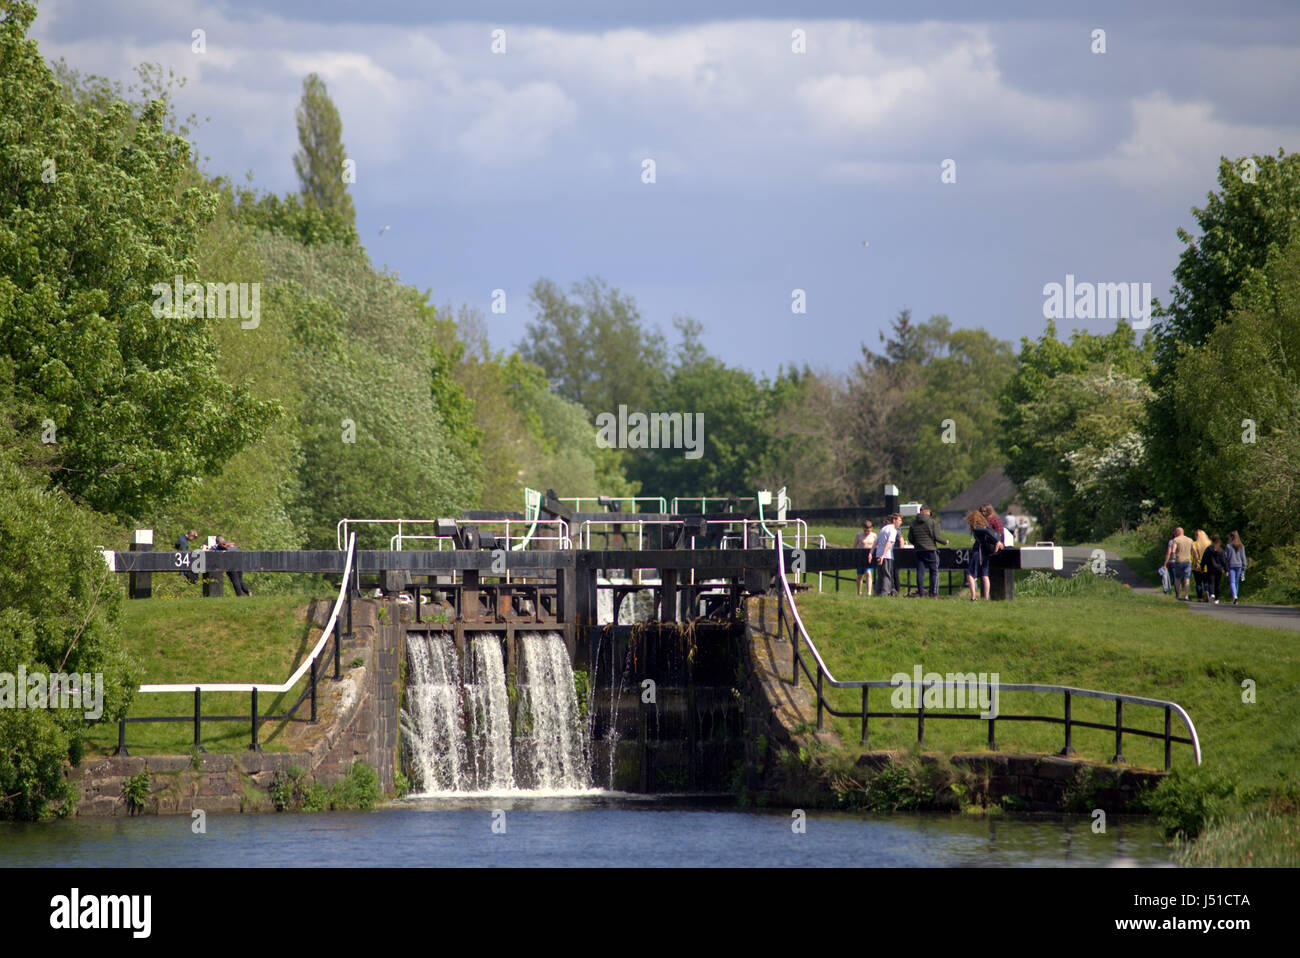 Forth and Clyde canal tow path lock 35 children playing Stock Photo